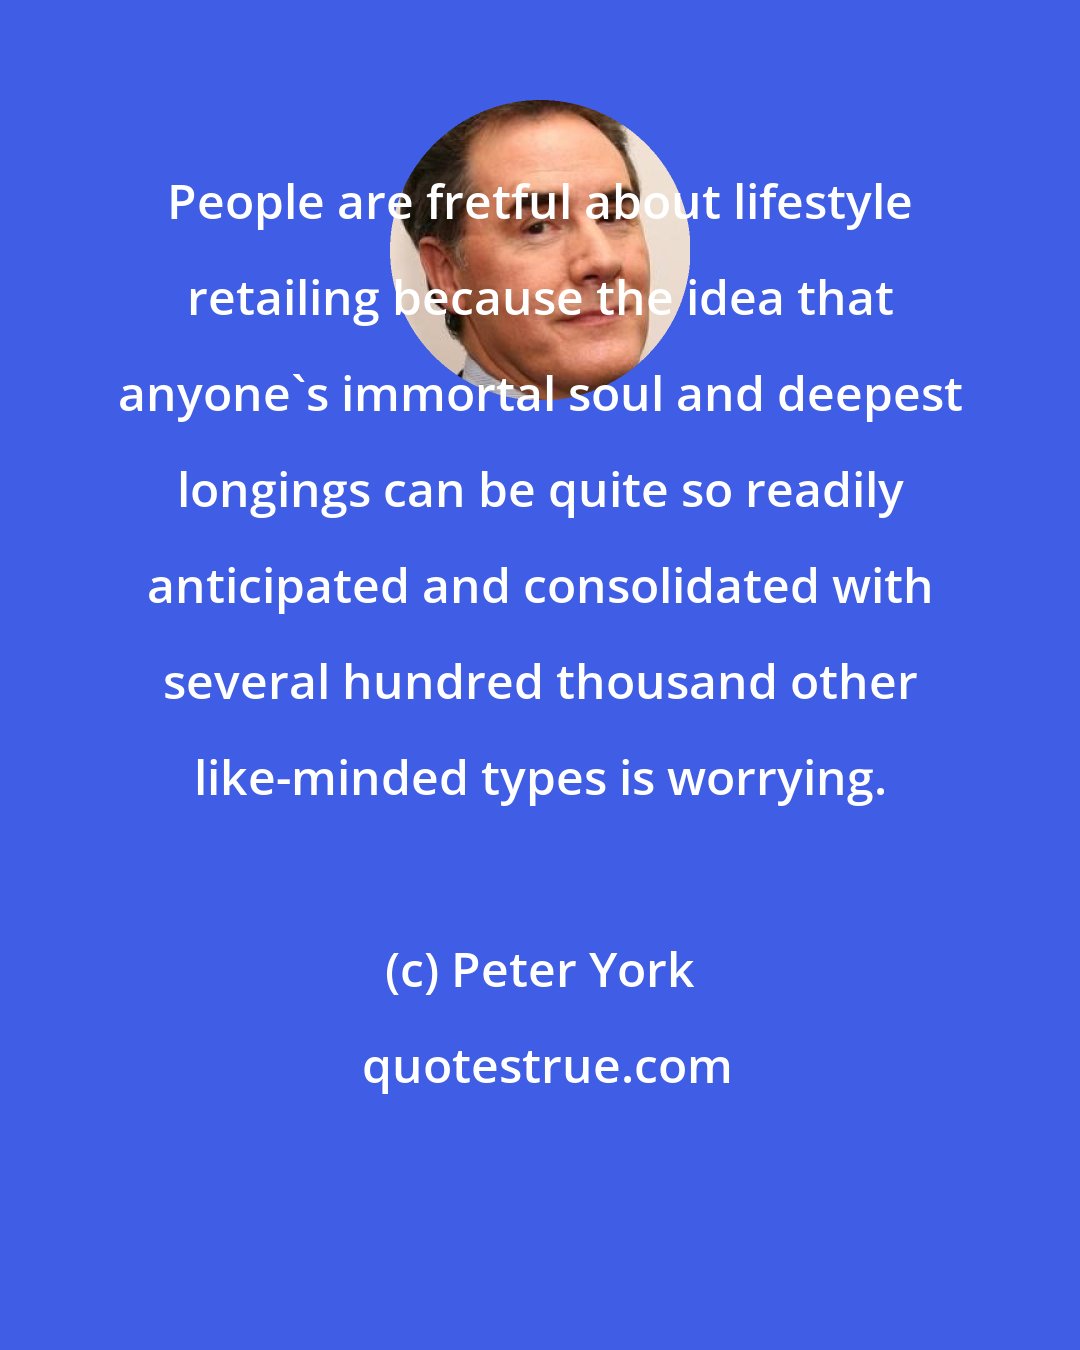 Peter York: People are fretful about lifestyle retailing because the idea that anyone's immortal soul and deepest longings can be quite so readily anticipated and consolidated with several hundred thousand other like-minded types is worrying.